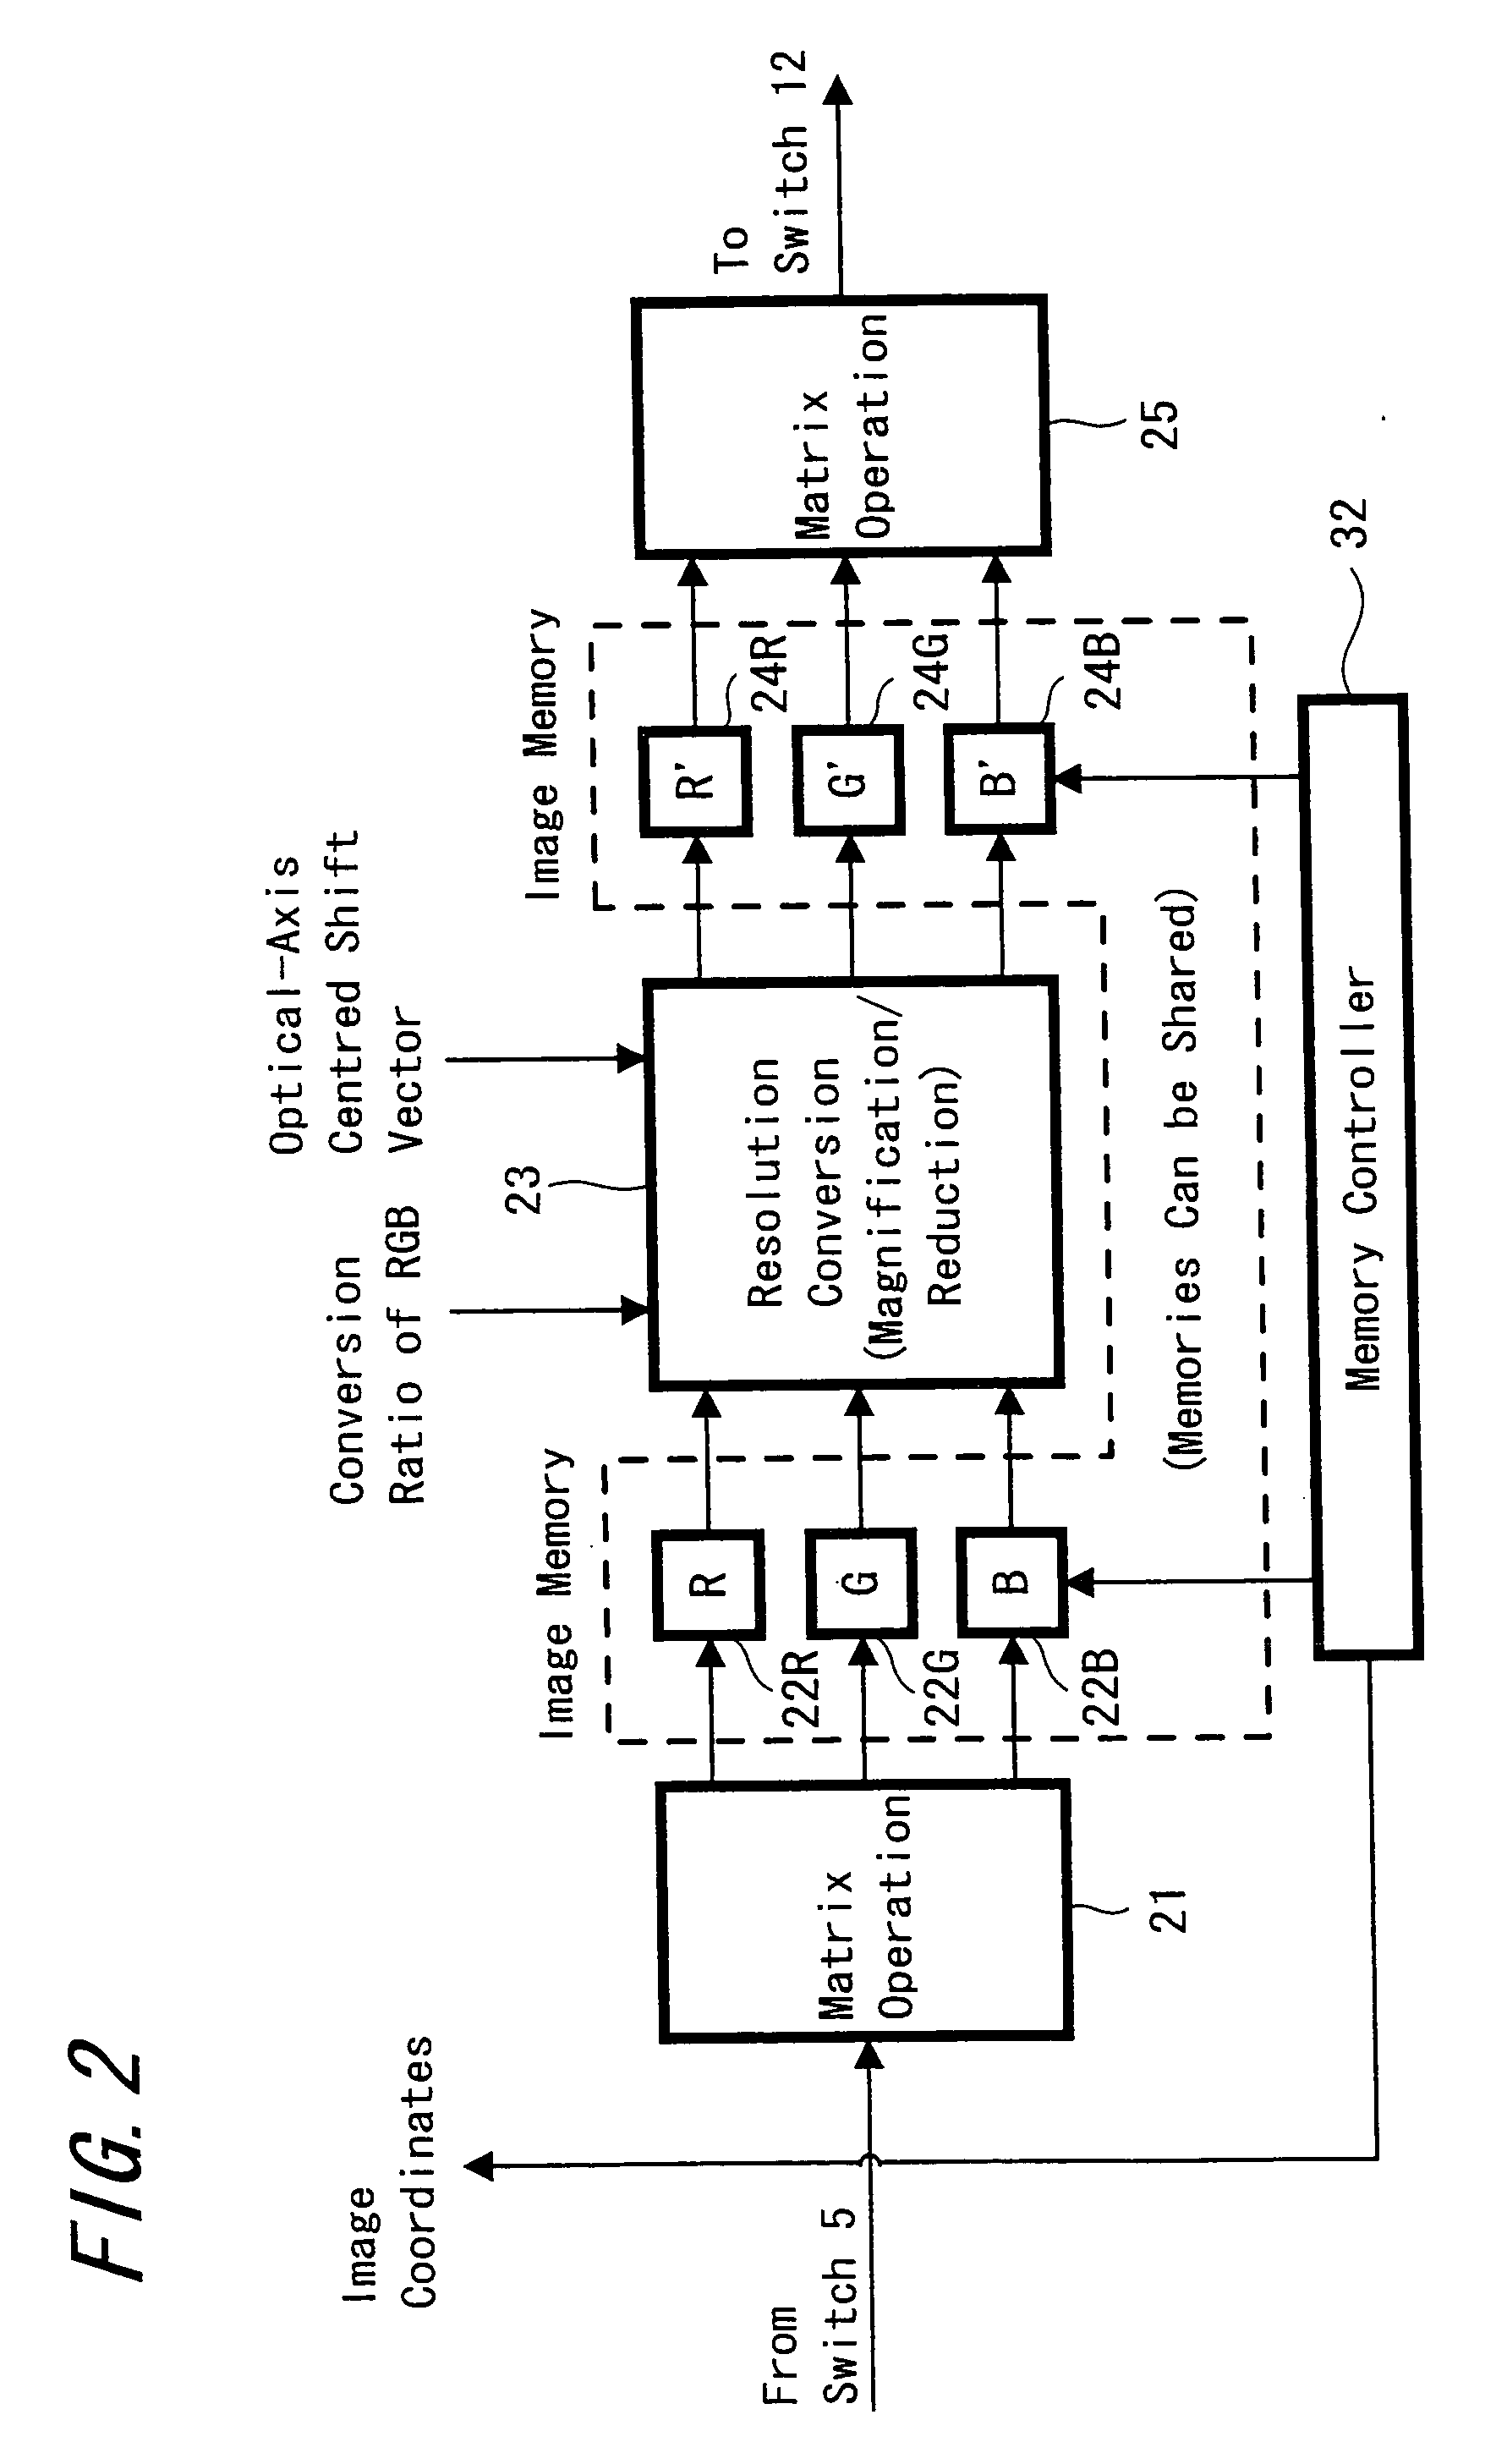 Image recording/reproducing apparatus, image pick-up apparatus, and color aberration correcting method